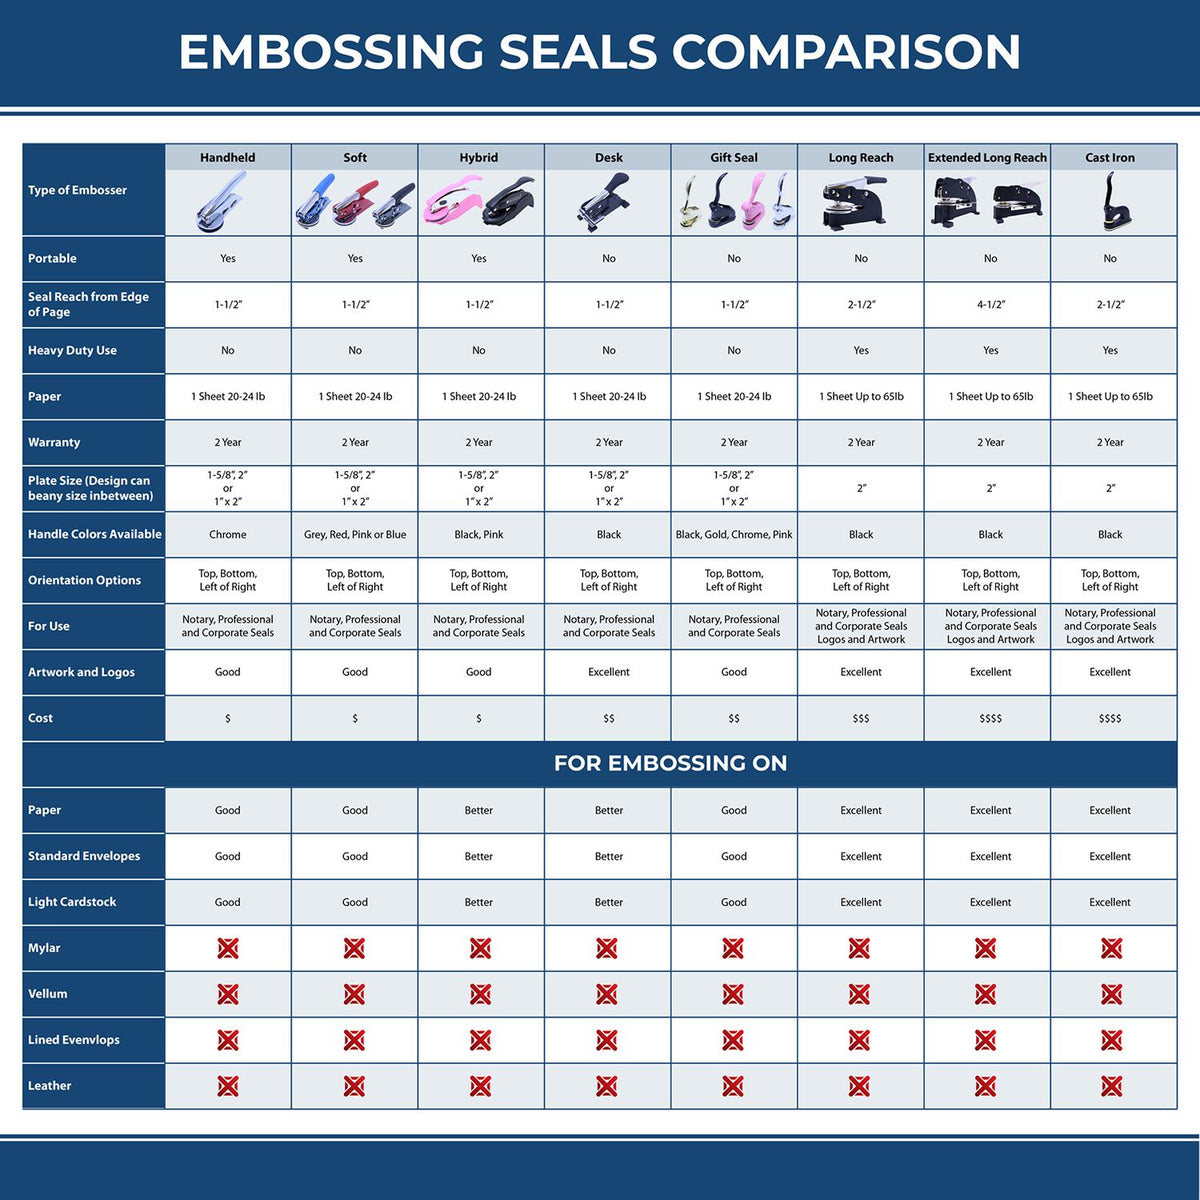 A comparison chart for the different types of mount models available for the Hybrid New York Engineer Seal